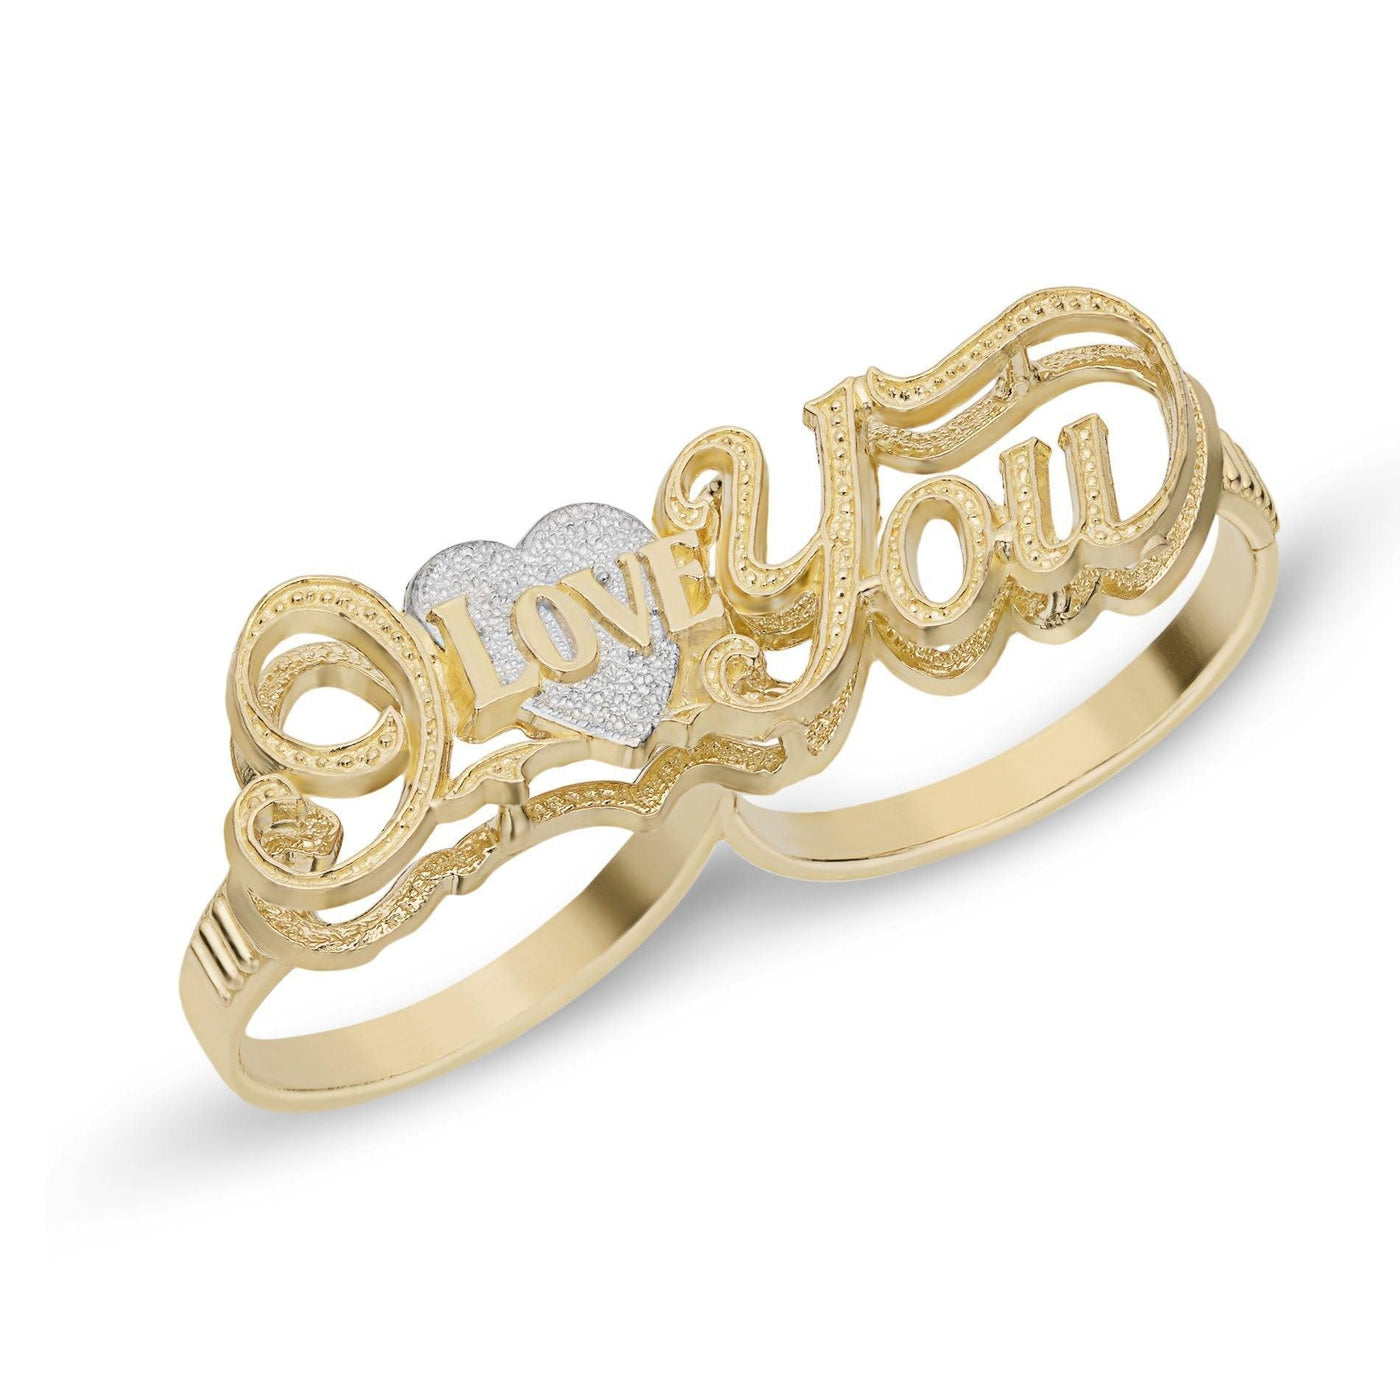 "I Love You" Script Textured Heart Two-Finger Ring 10K Yellow Gold - bayamjewelry